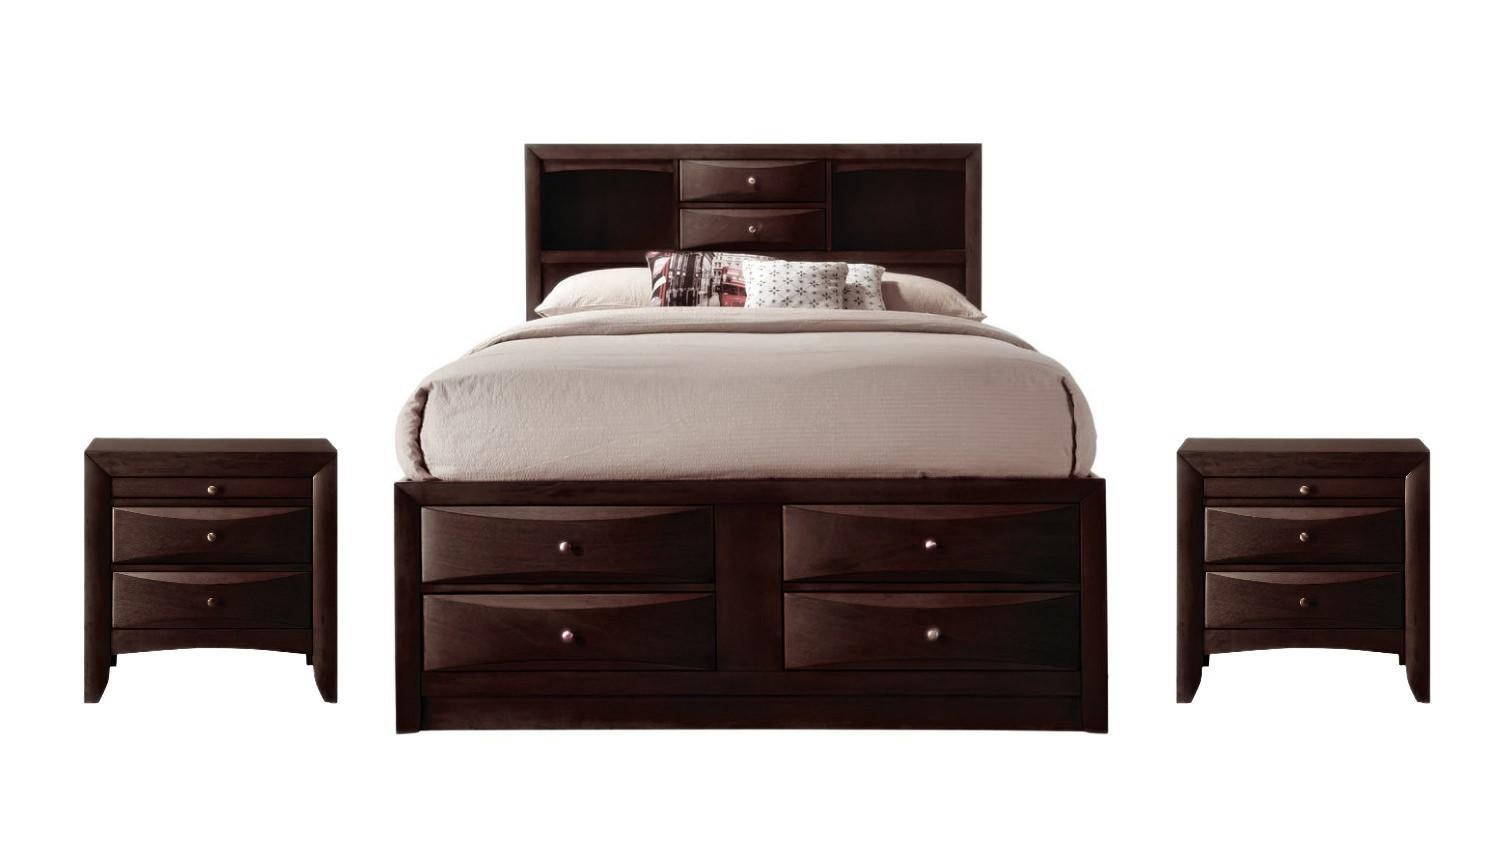 Contemporary, Transitional Storage Bedroom Set Emily B4265-Q-Bed-3pcs in Brown 